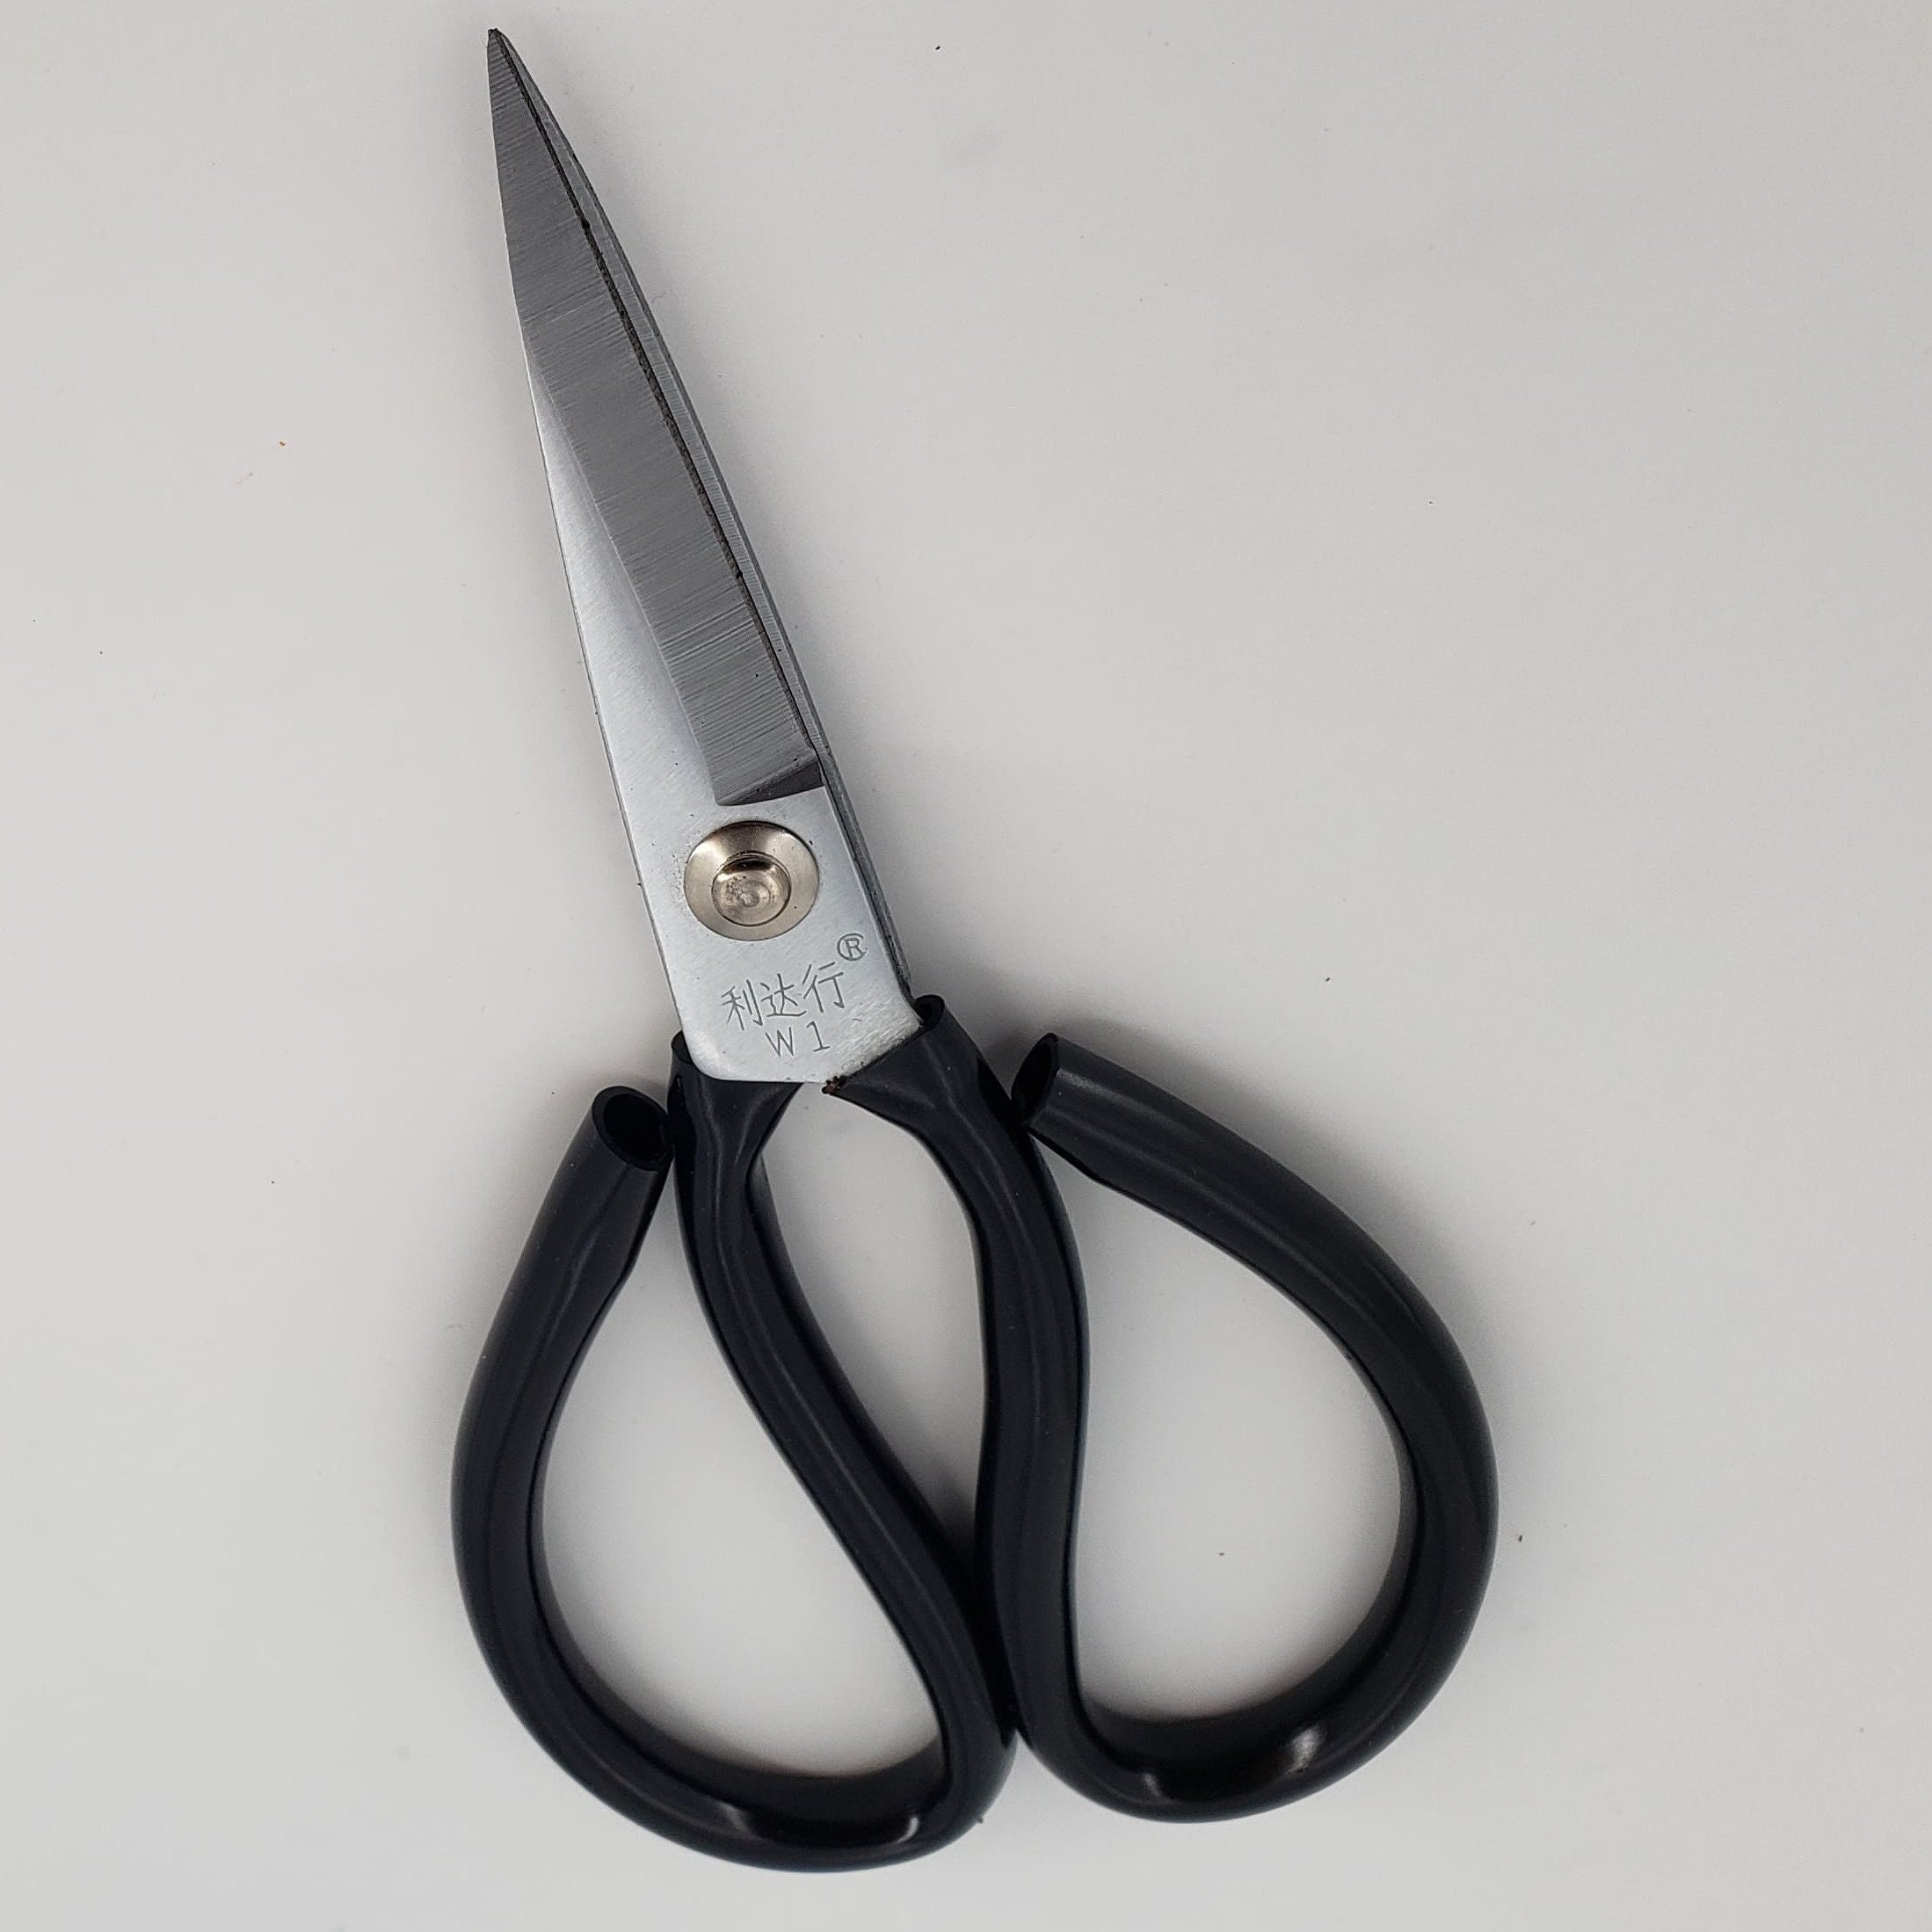 Heavy Duty Scissors Style Jewelers Shears Snip Straight Jaws Color